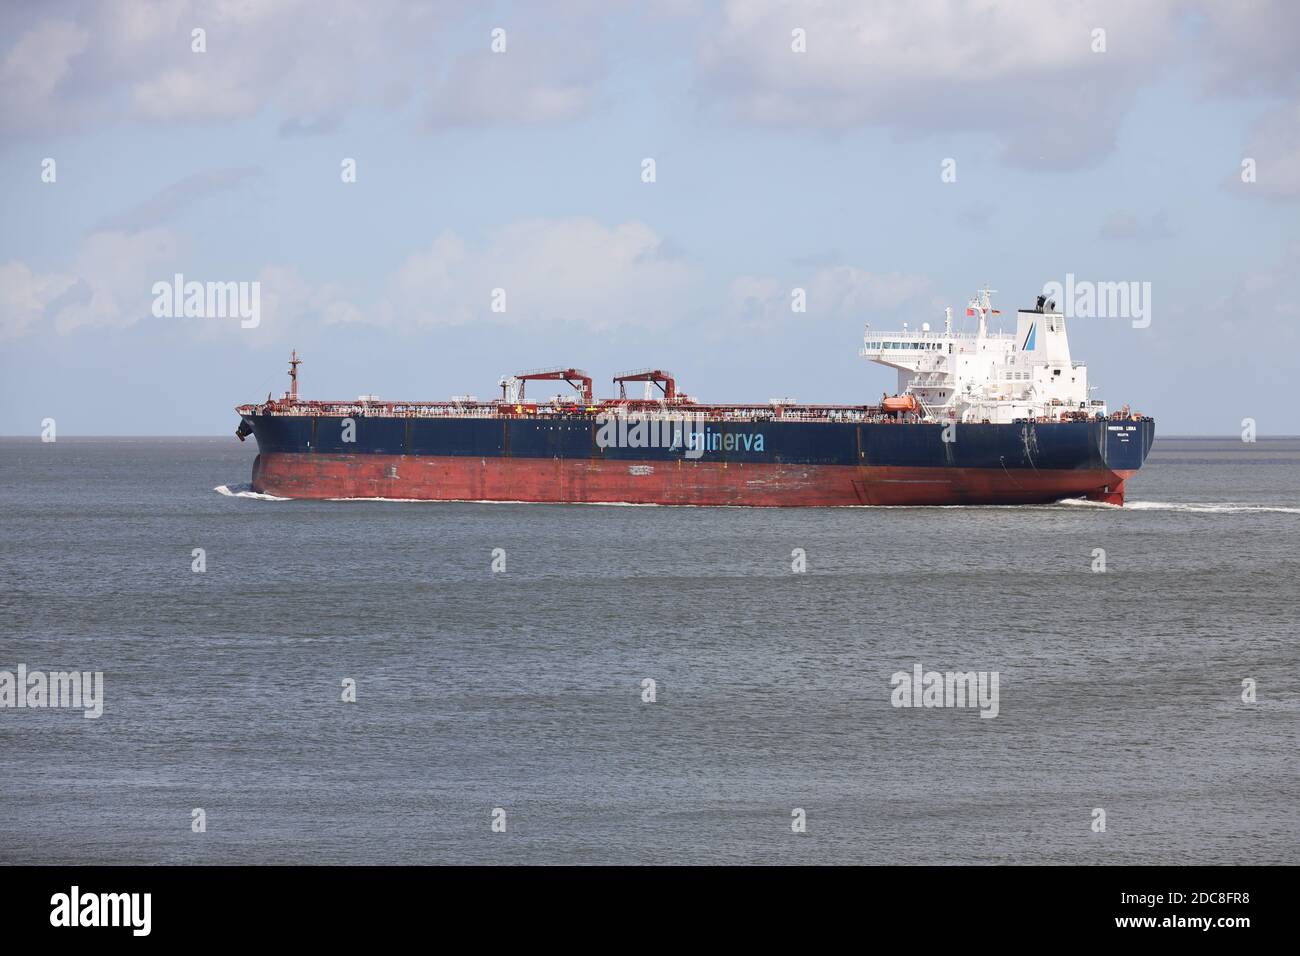 The crude oil tanker Minerva Libra will pass Cuxhaven on August 22, 2020 on its way to the North Sea. Stock Photo